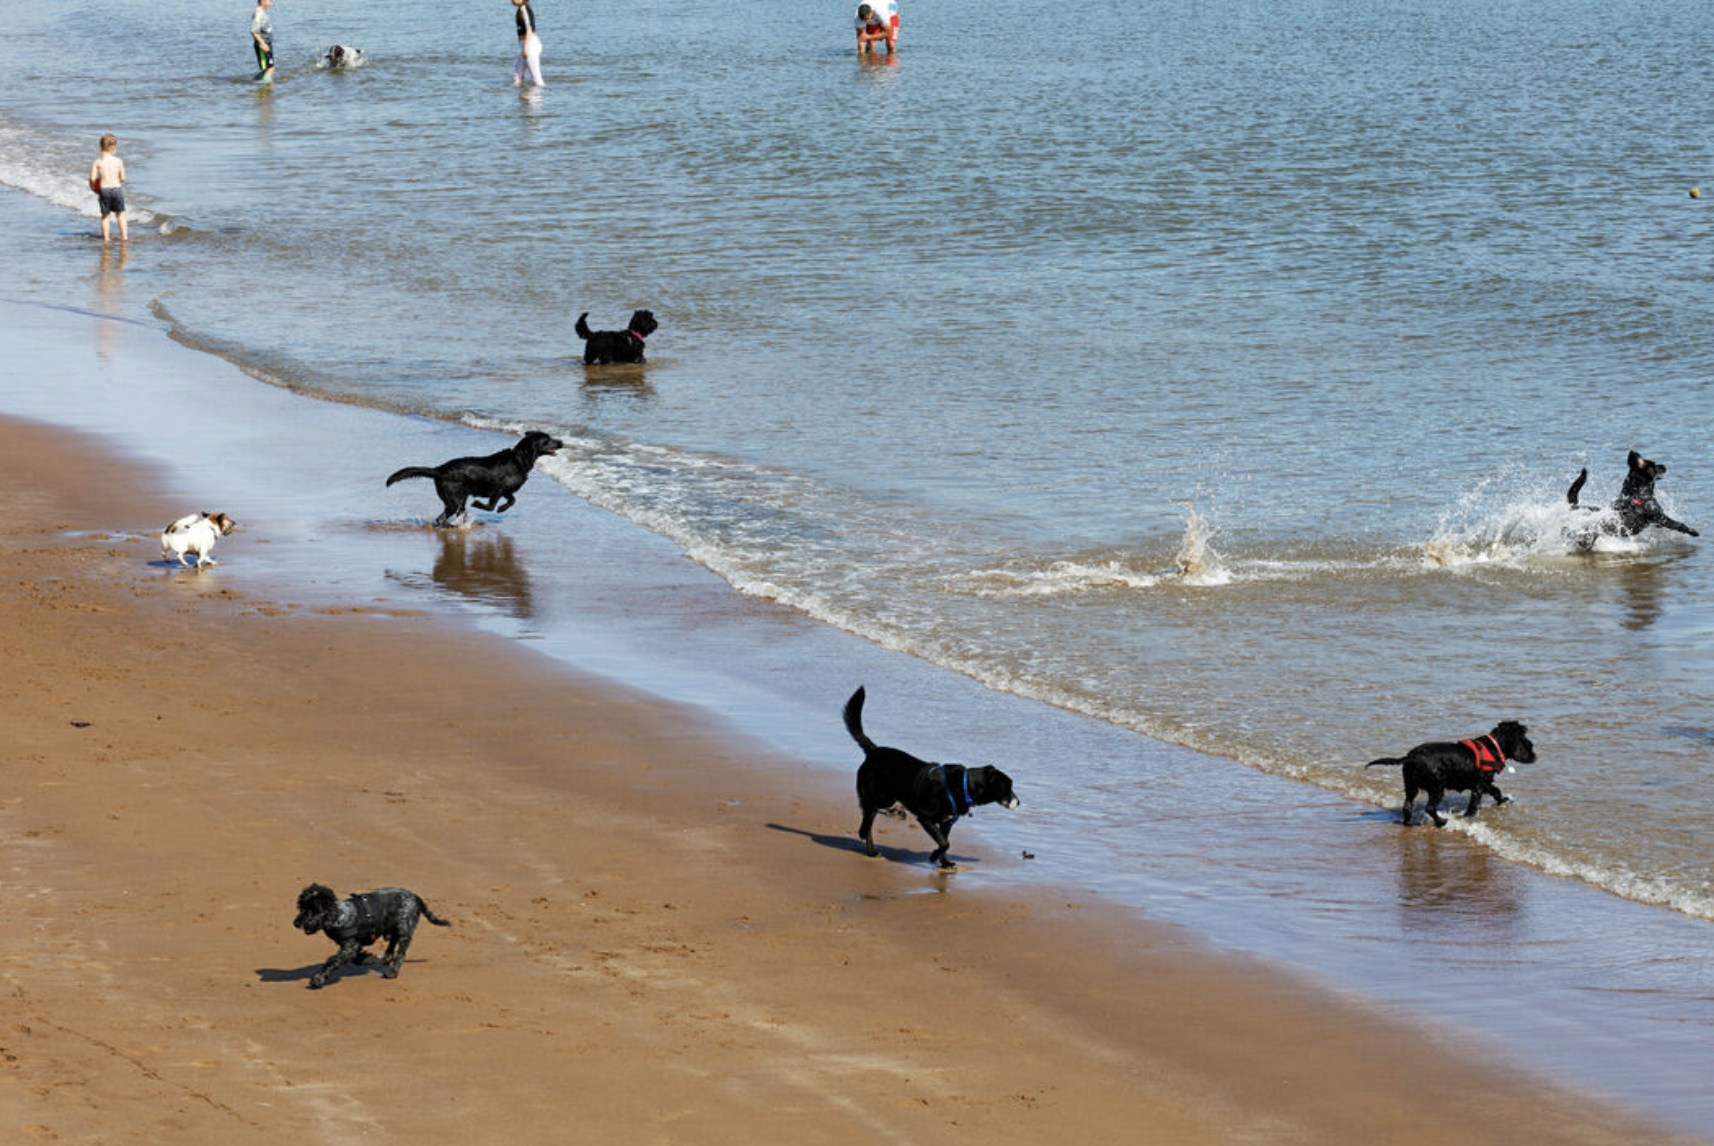 Dogs seen running freely on the beach enjoying the water